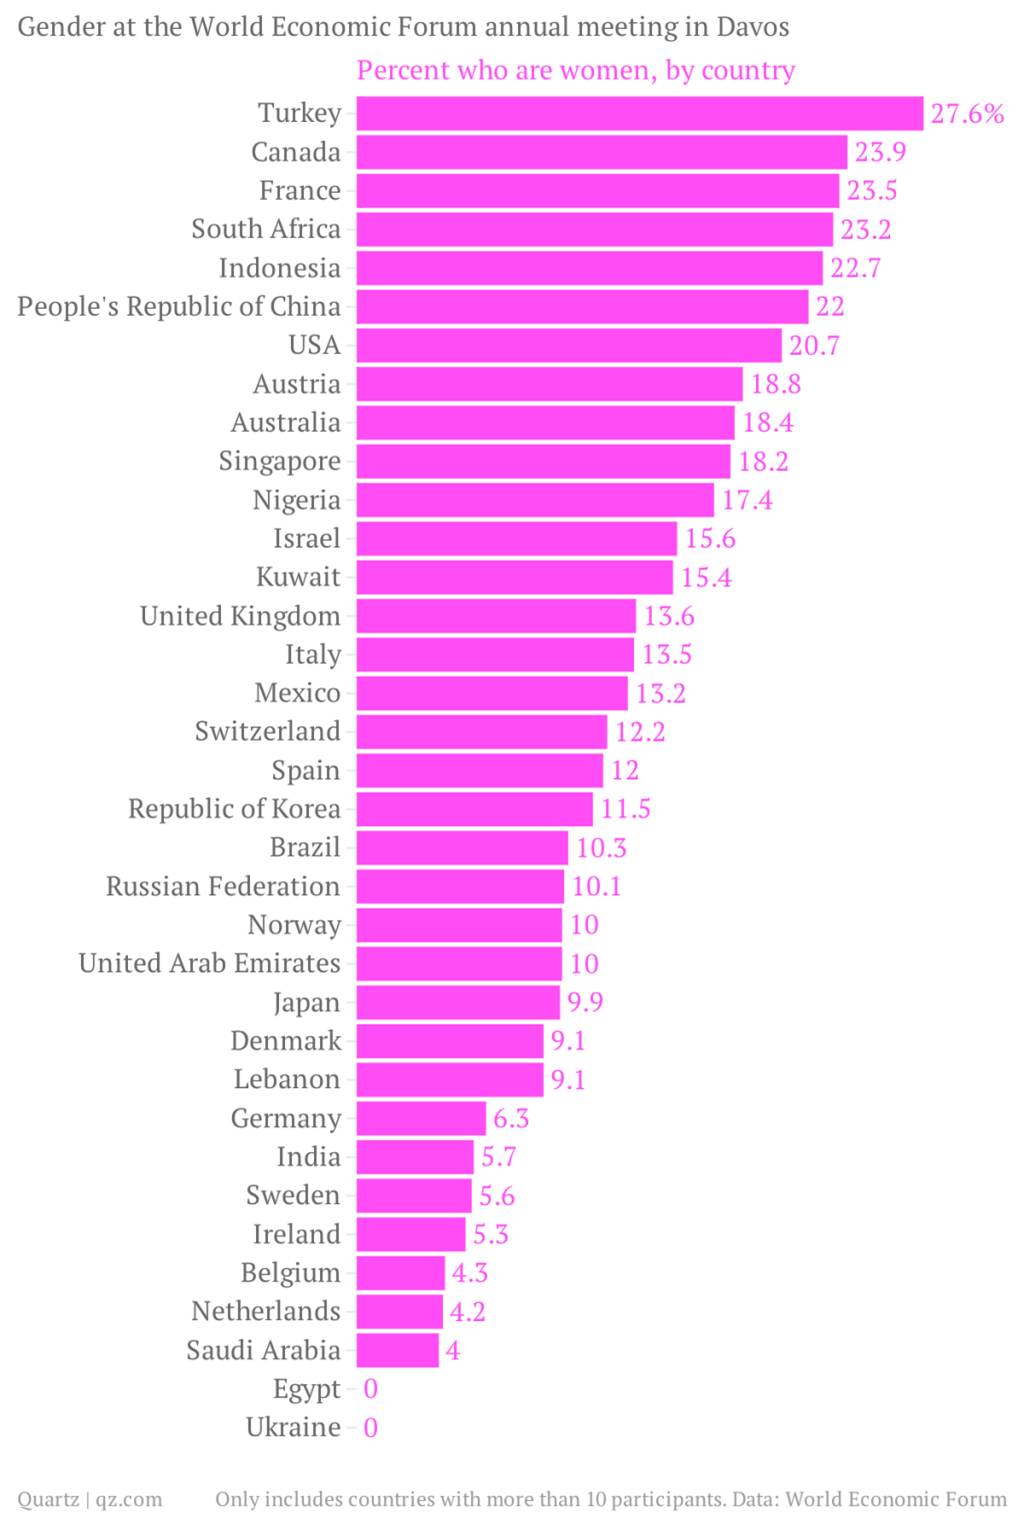 Gender-at-the-World-Economic-Forum-annual-meeting-in-Davos-Percent-who-are-women-by-country_chartbuilder (2)